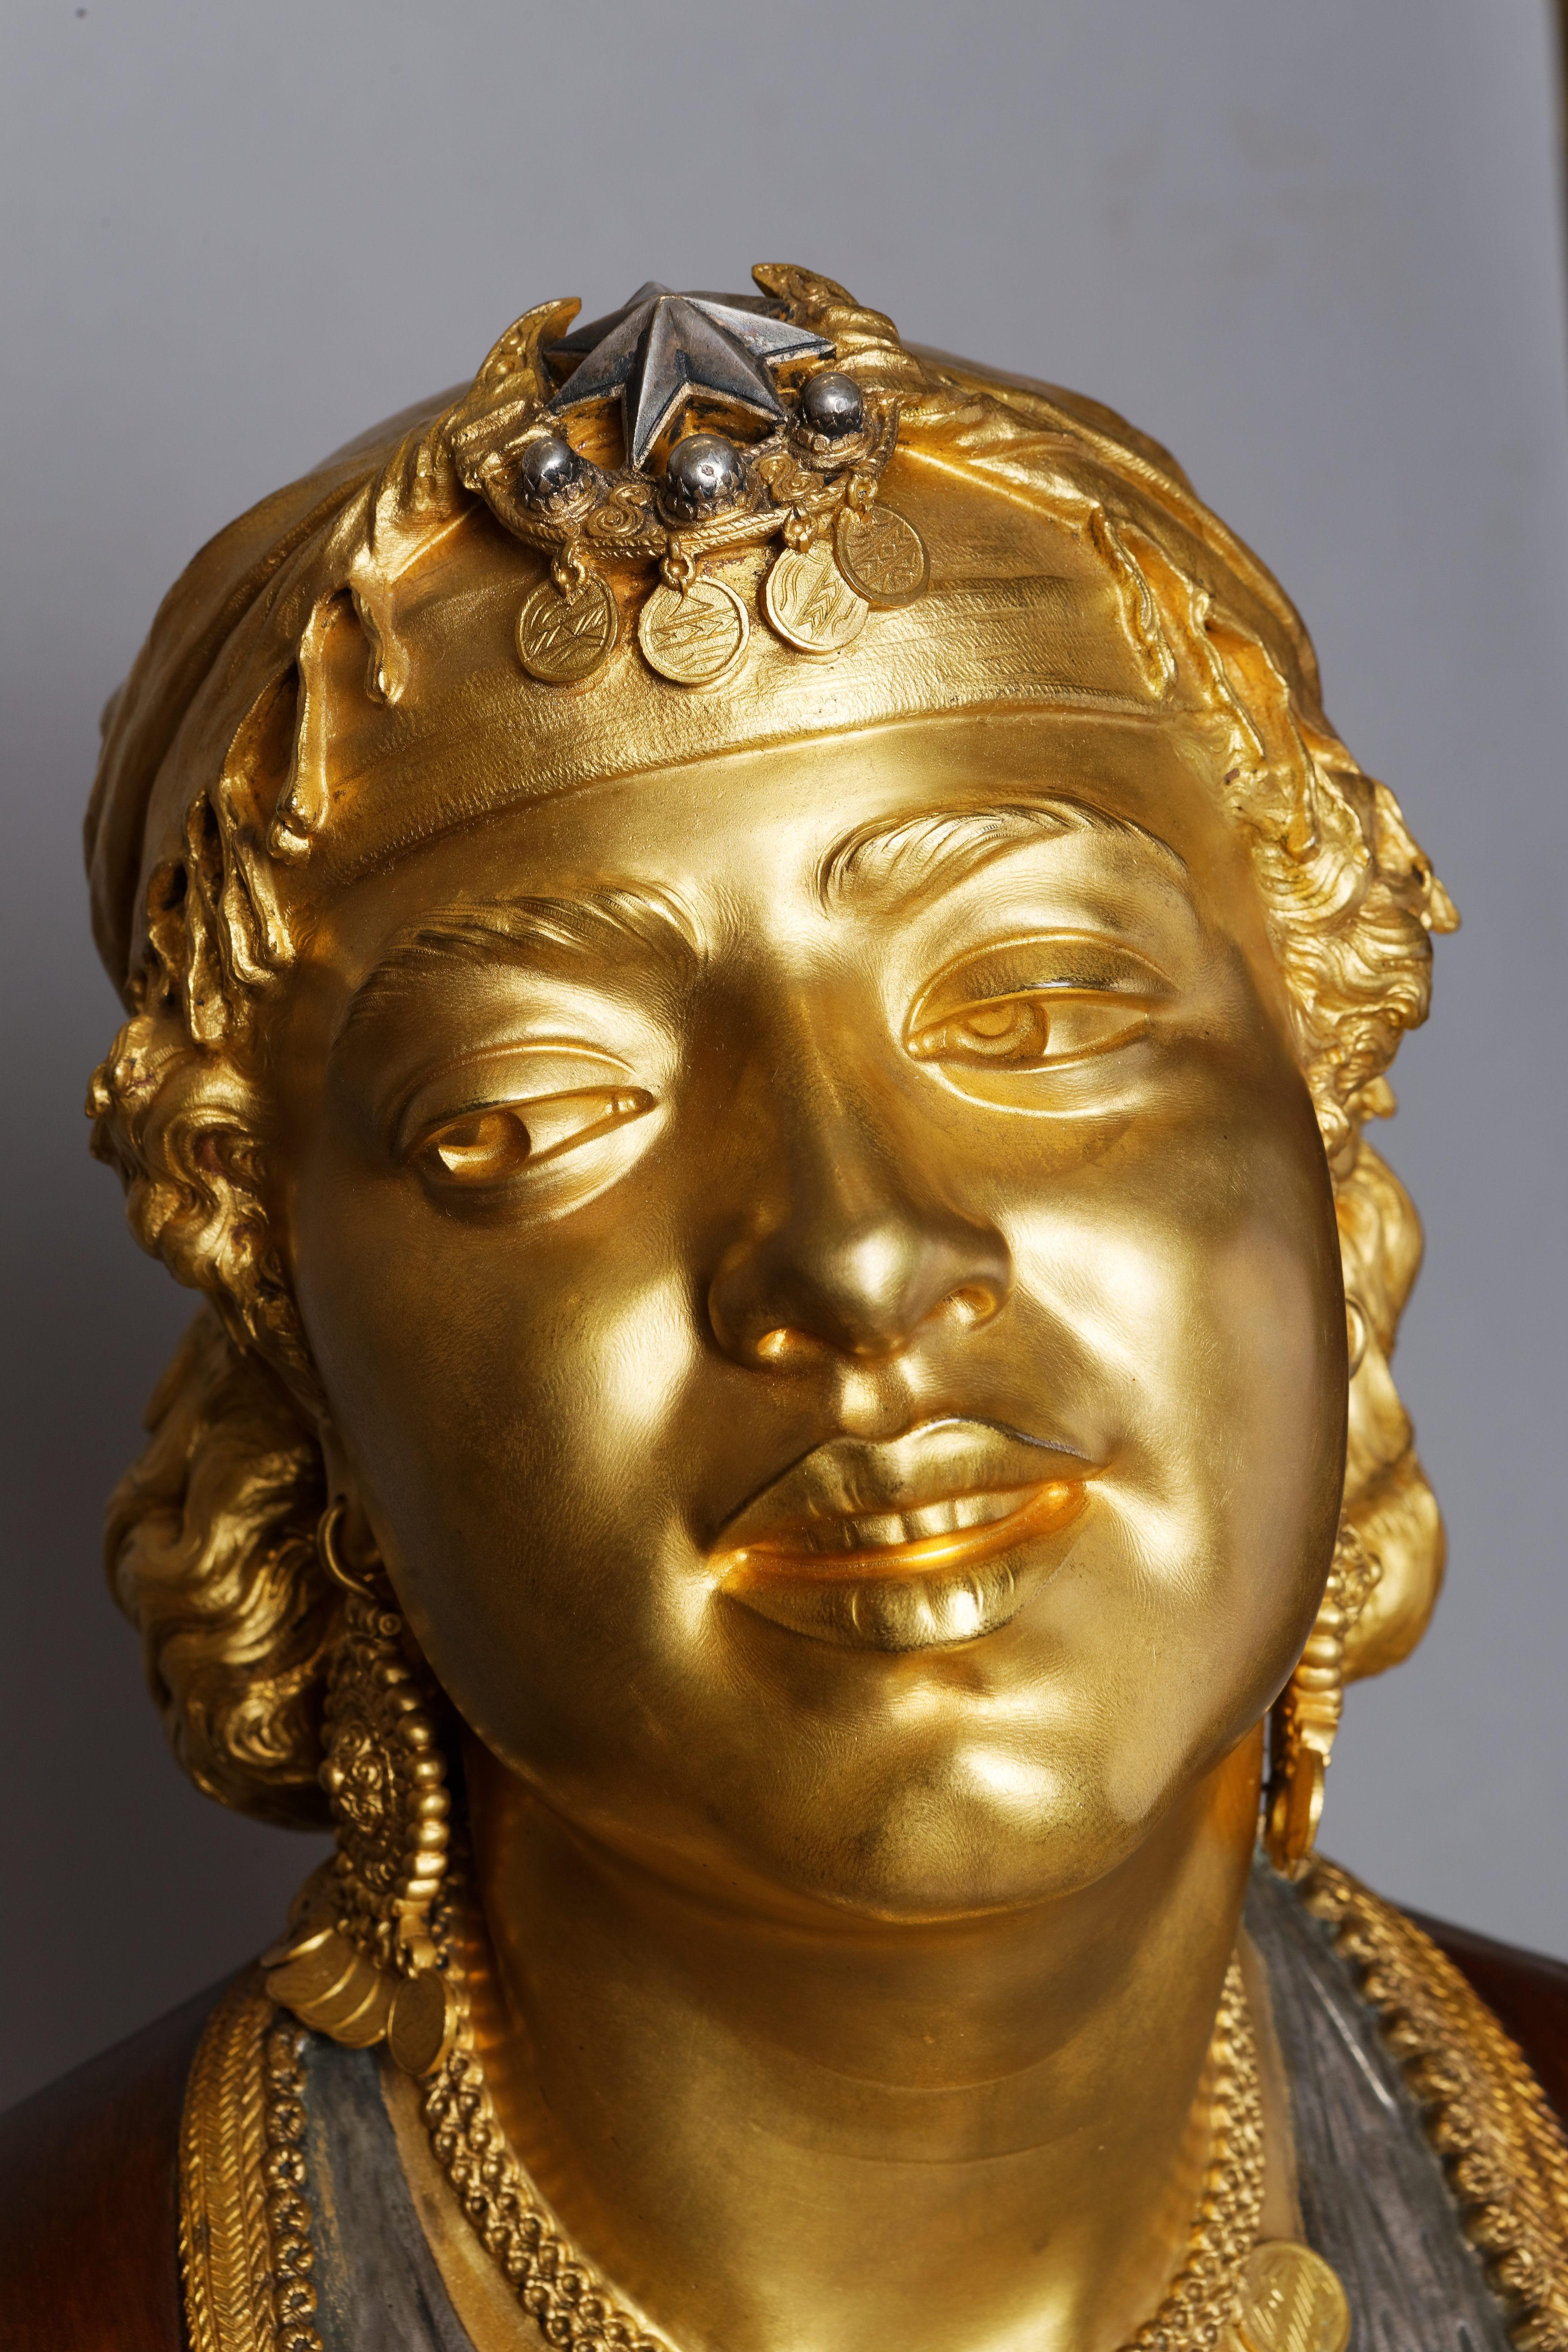 Bust of an Oriental woman
by Emile GUILLEMIN (1841-1907)
Orientalist bronze sculpture with triple patina, gilded, dark reddish brown and silvered.

France
circa 1880
total height 63 cm

Biography :
Emile-Coriolan Guillemin (1841-1907) was a Parisian